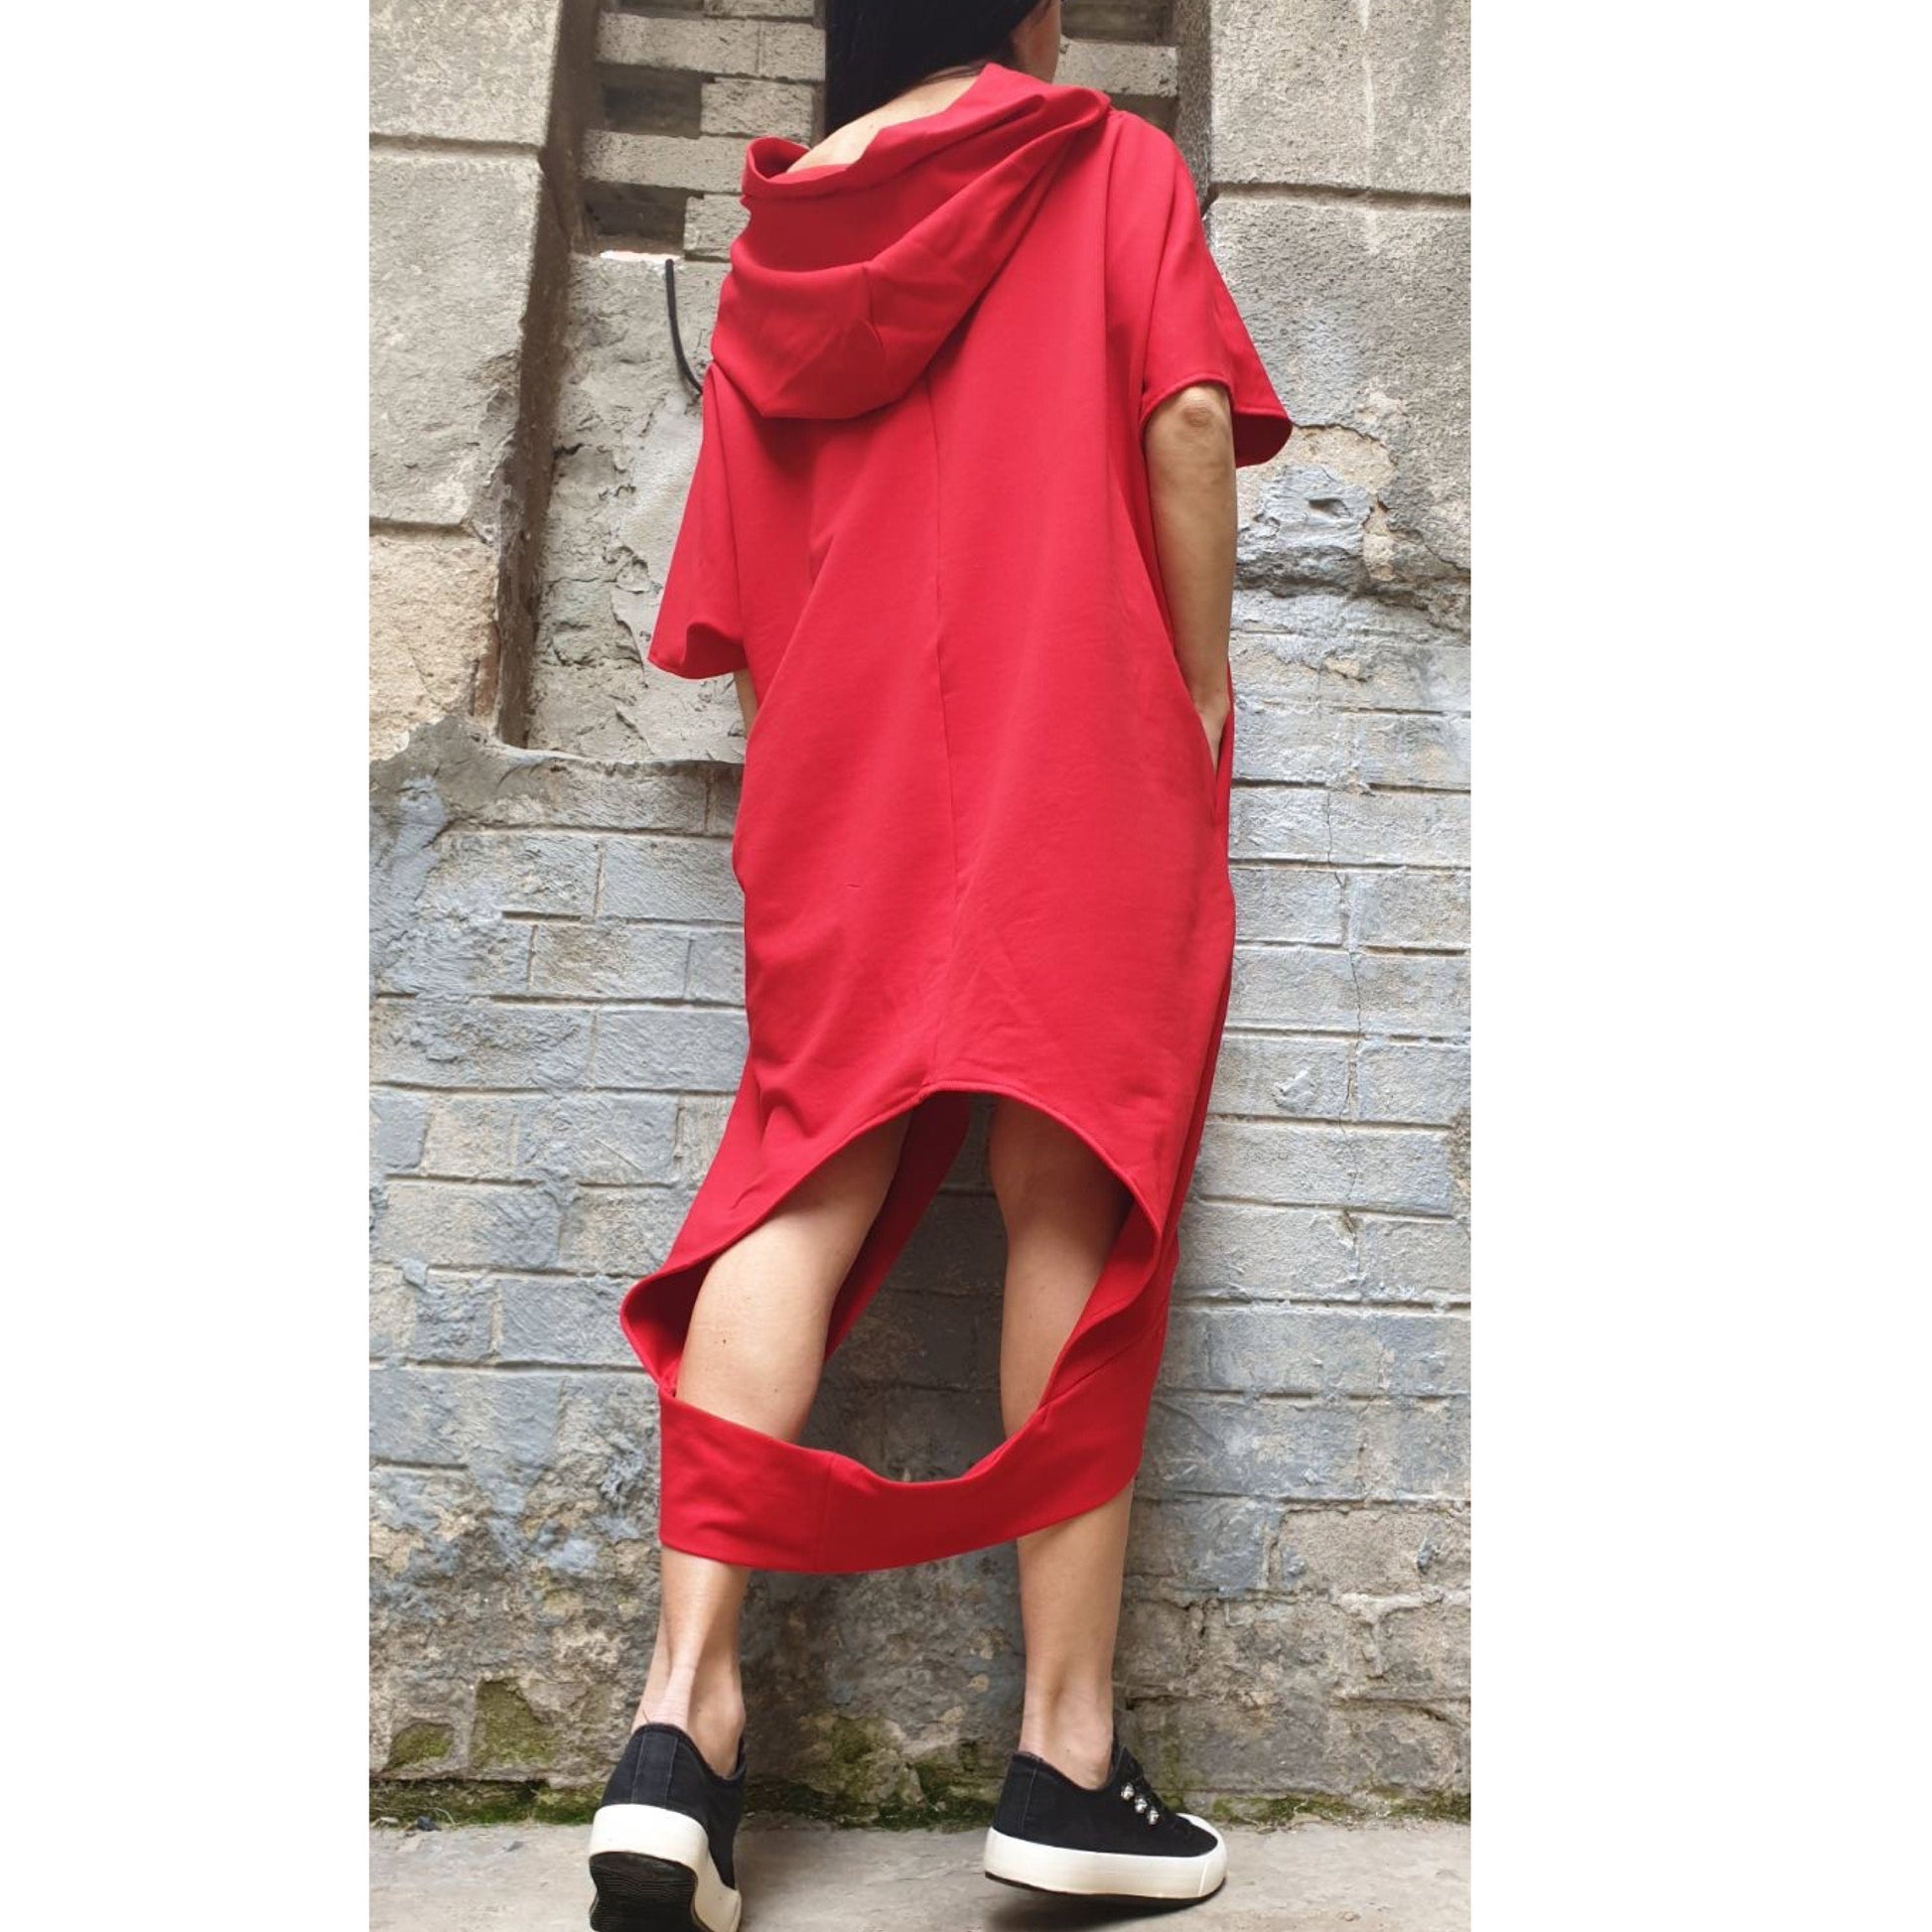 Red Loose Tunic - Handmade clothing from AngelBySilvia - Top Designer Brands 